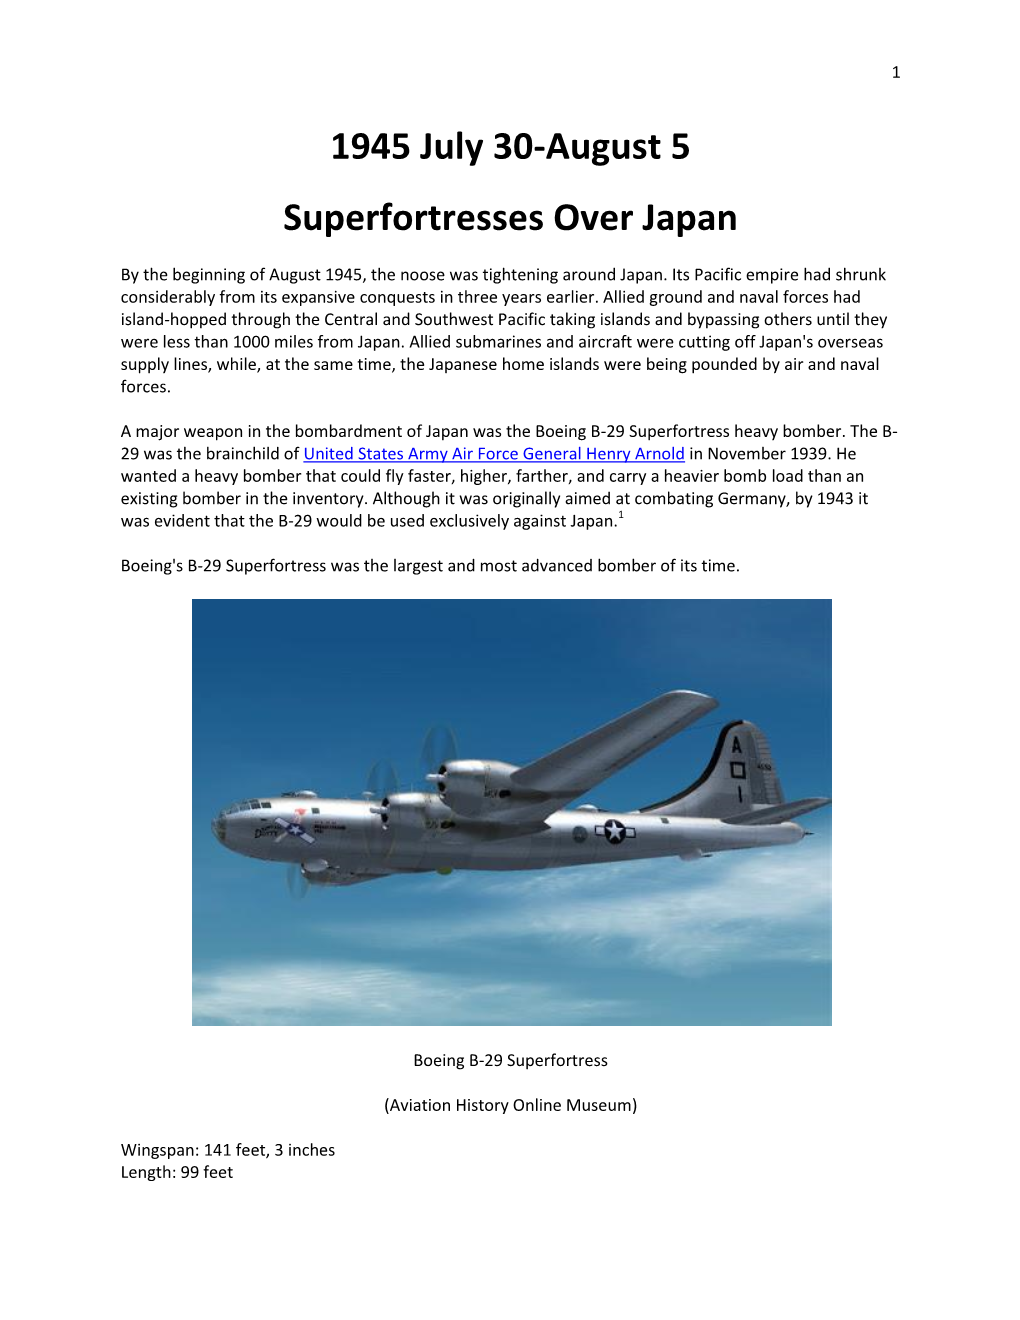 1945 July 30-August 5 Superfortresses Over Japan